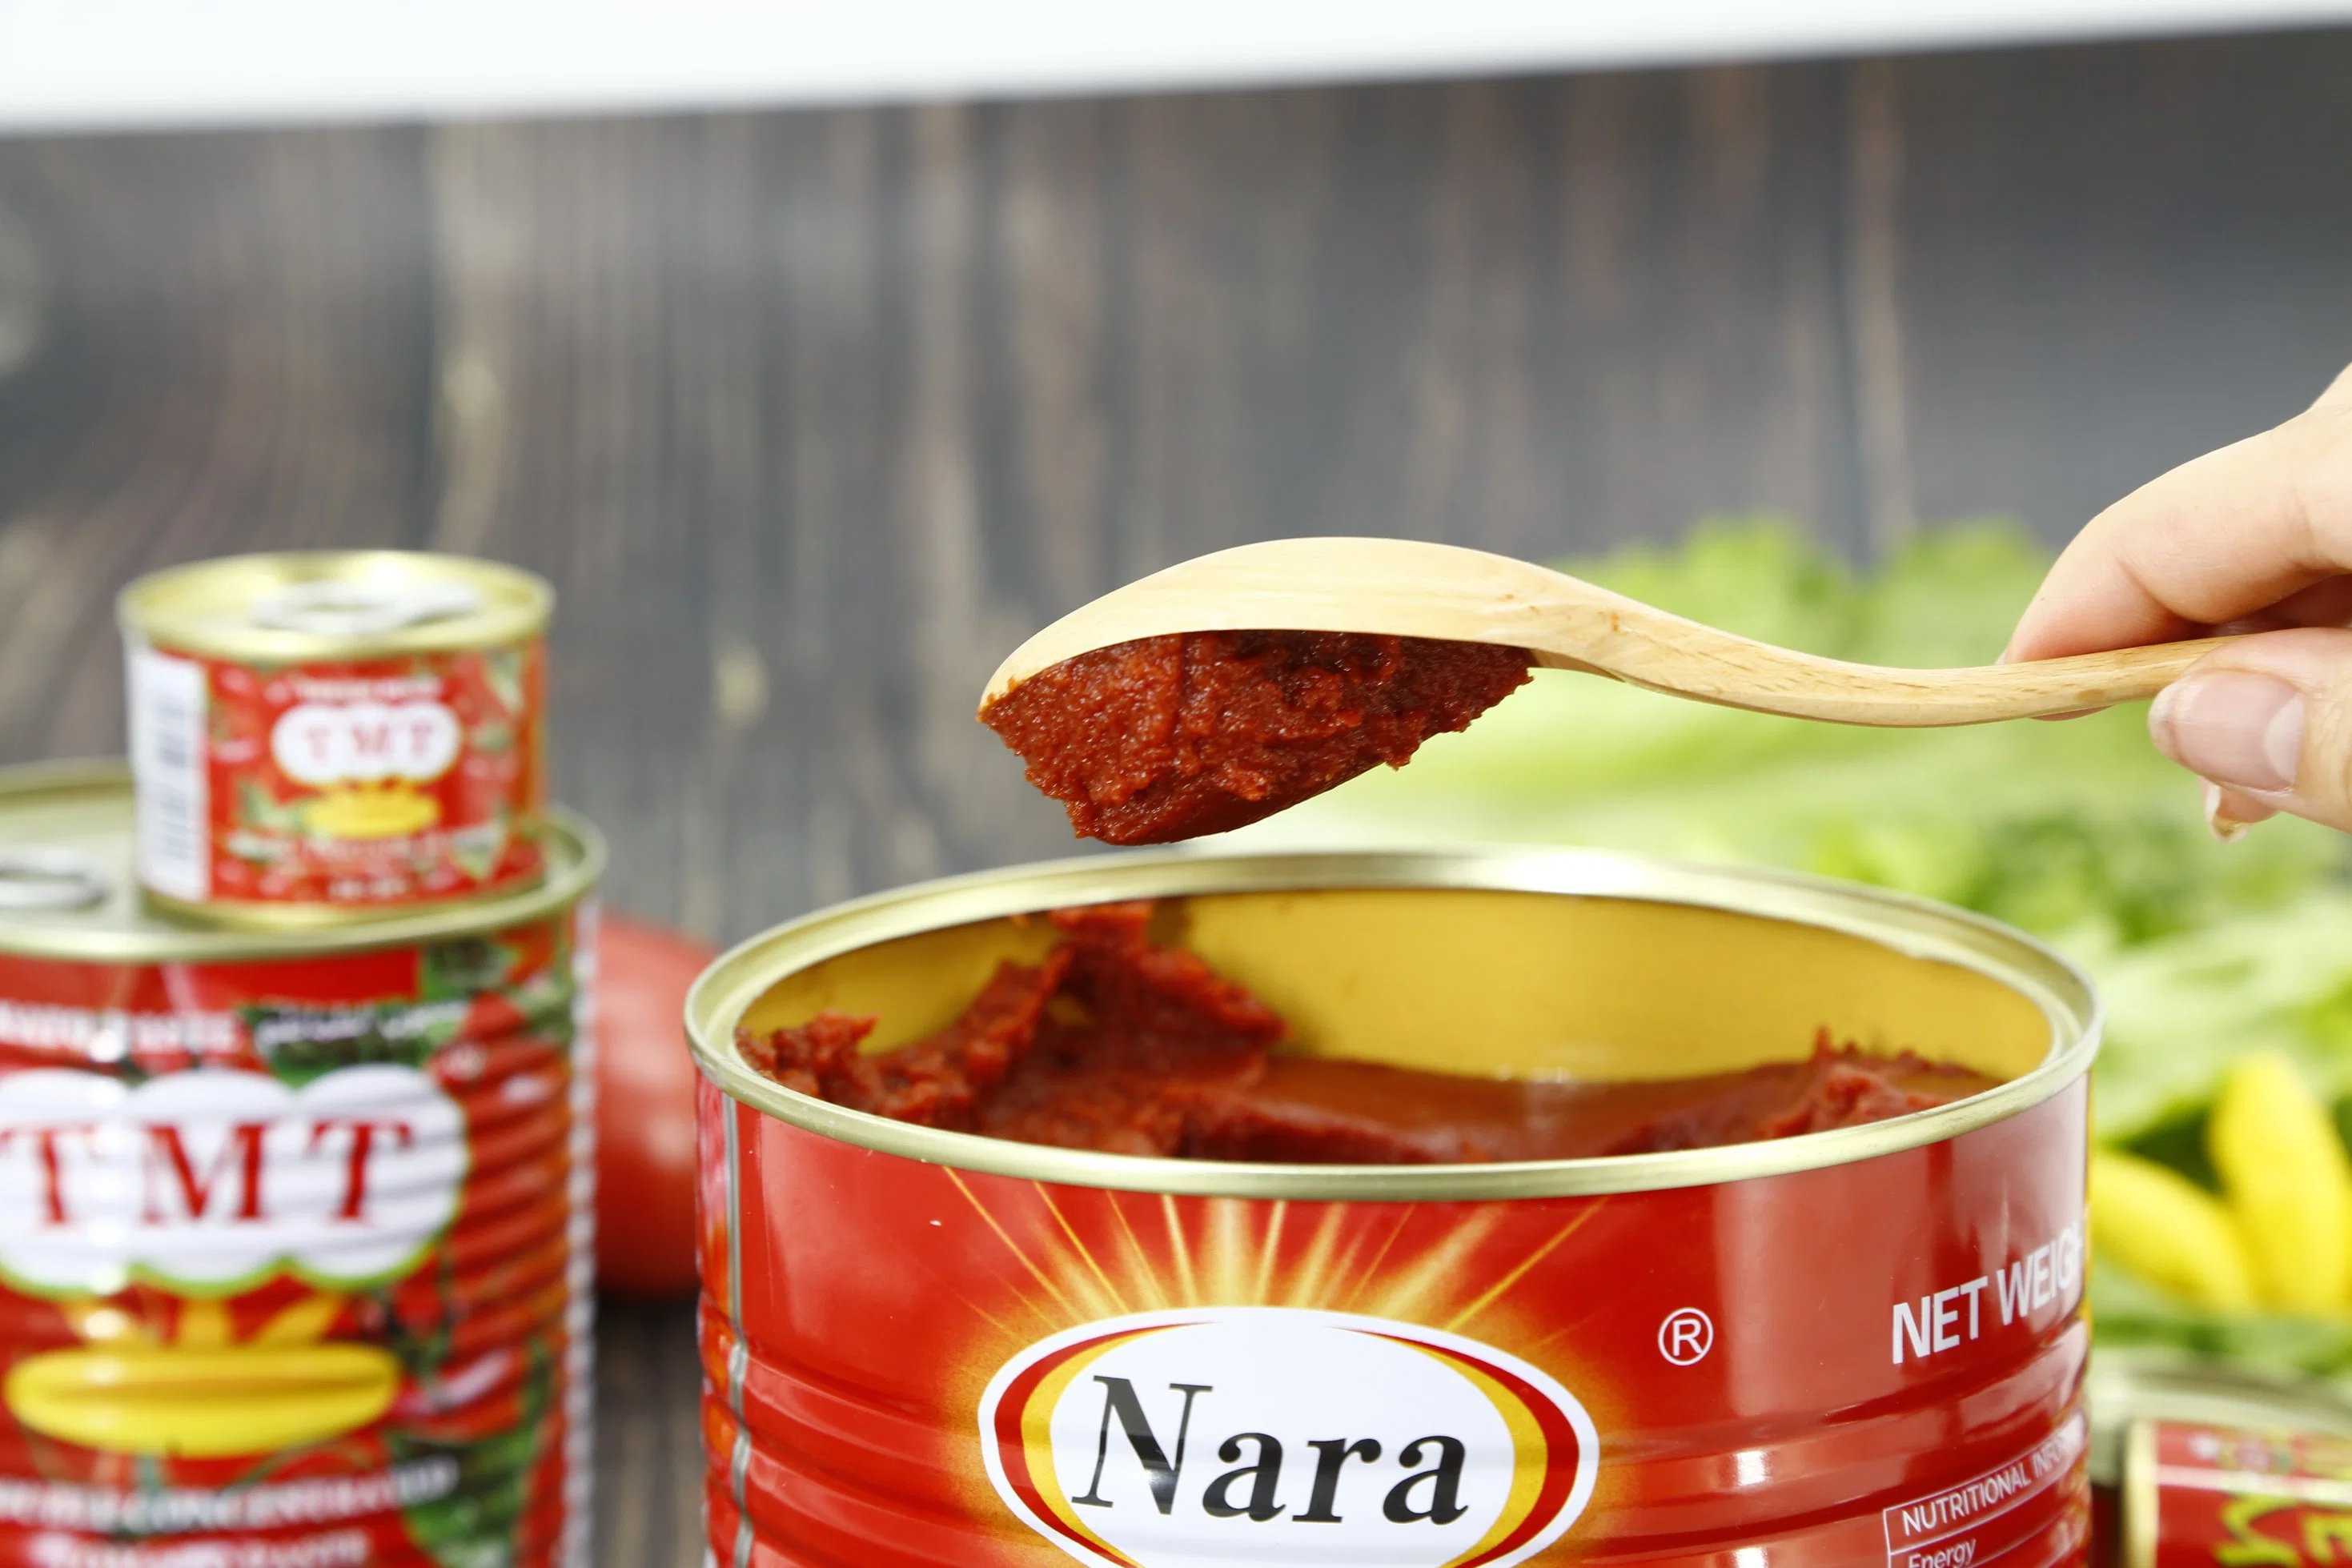 28-30% Canned Tomato Paste 400g Five Star Tomato Paste Supplier High Quality